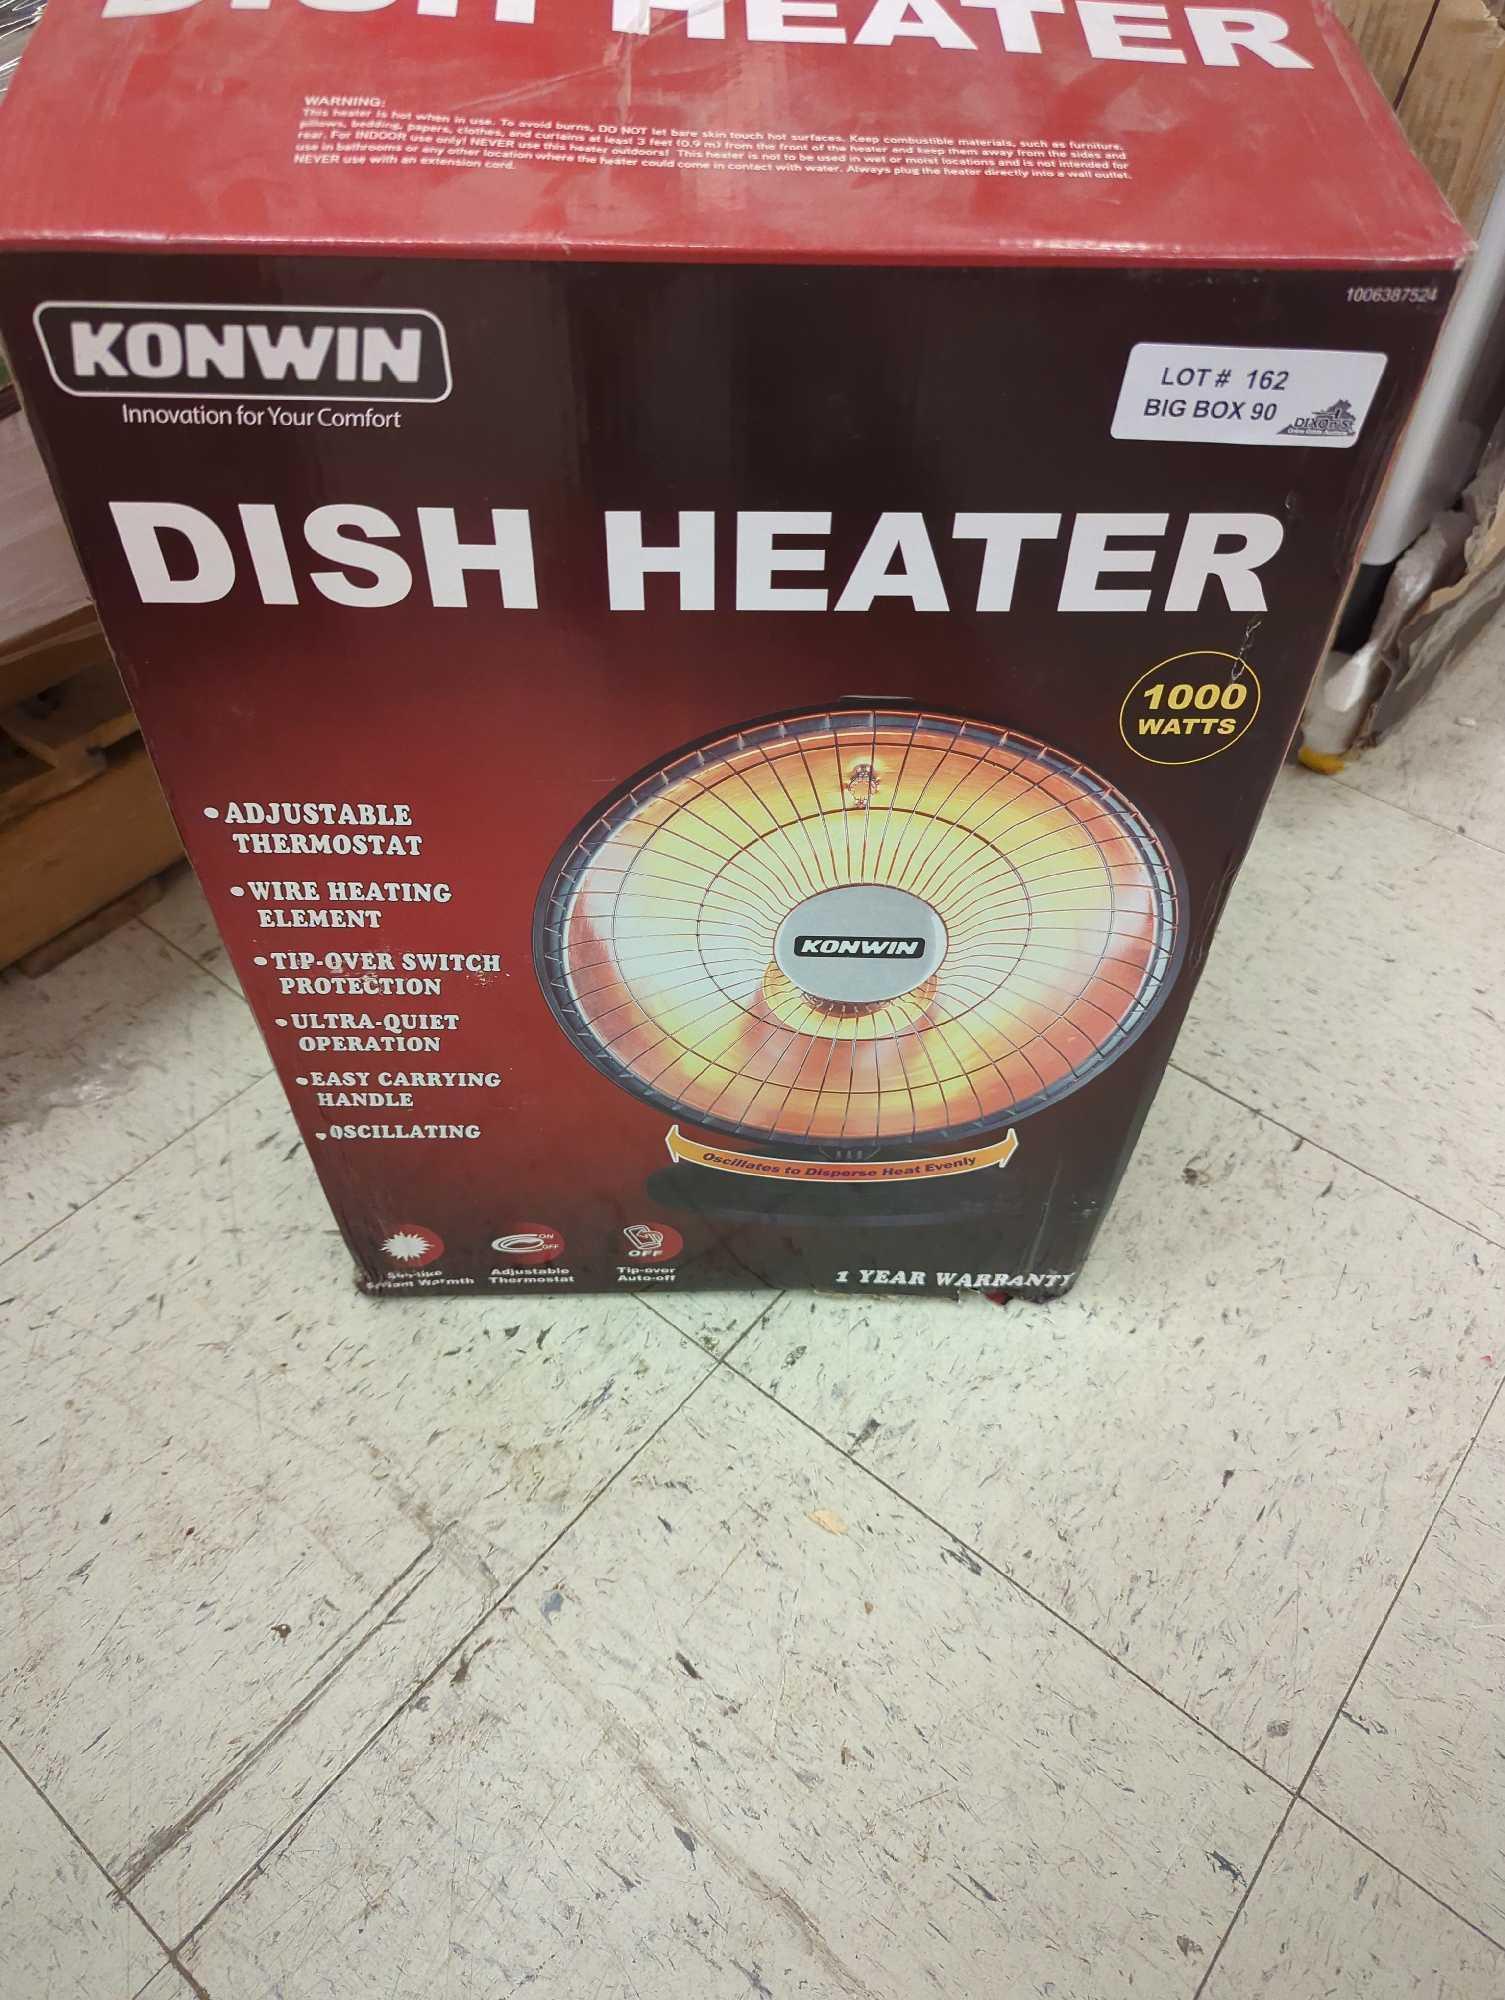 Konwin 1000-Watt Electric Infrared Space Heater with Oscillation, Appears to be New in Open Box